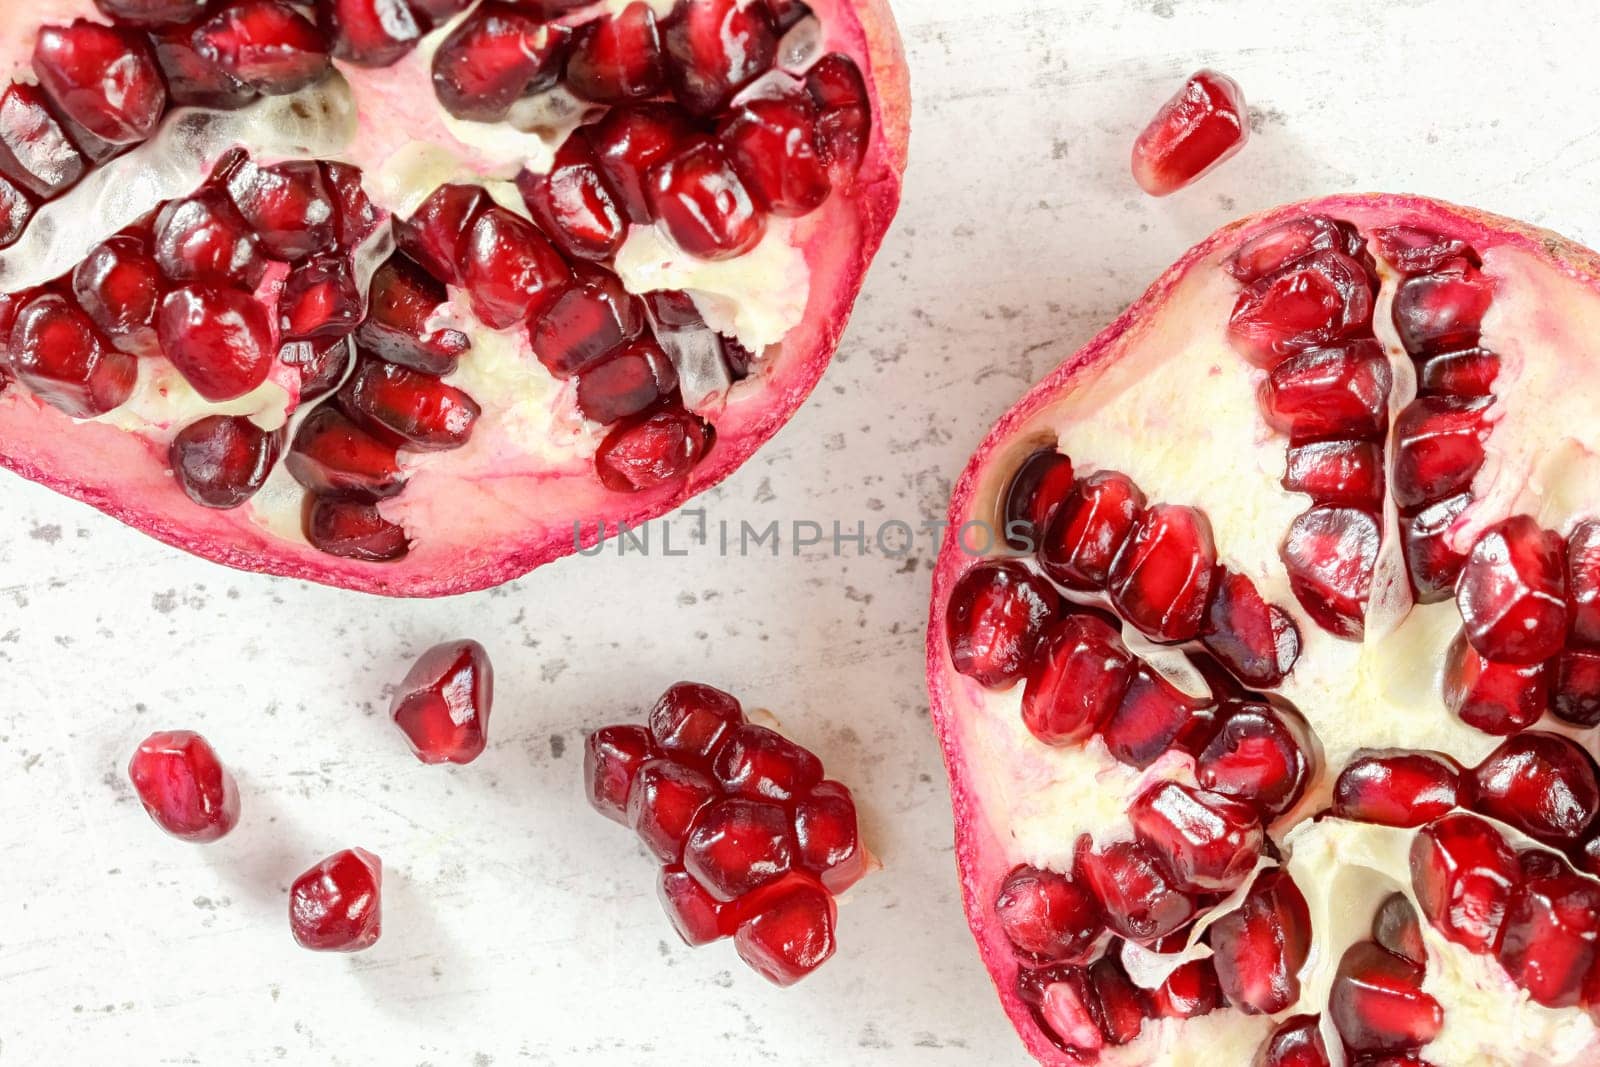 Pomegranate halves, gem like fruits scattered on white board, photo from above.